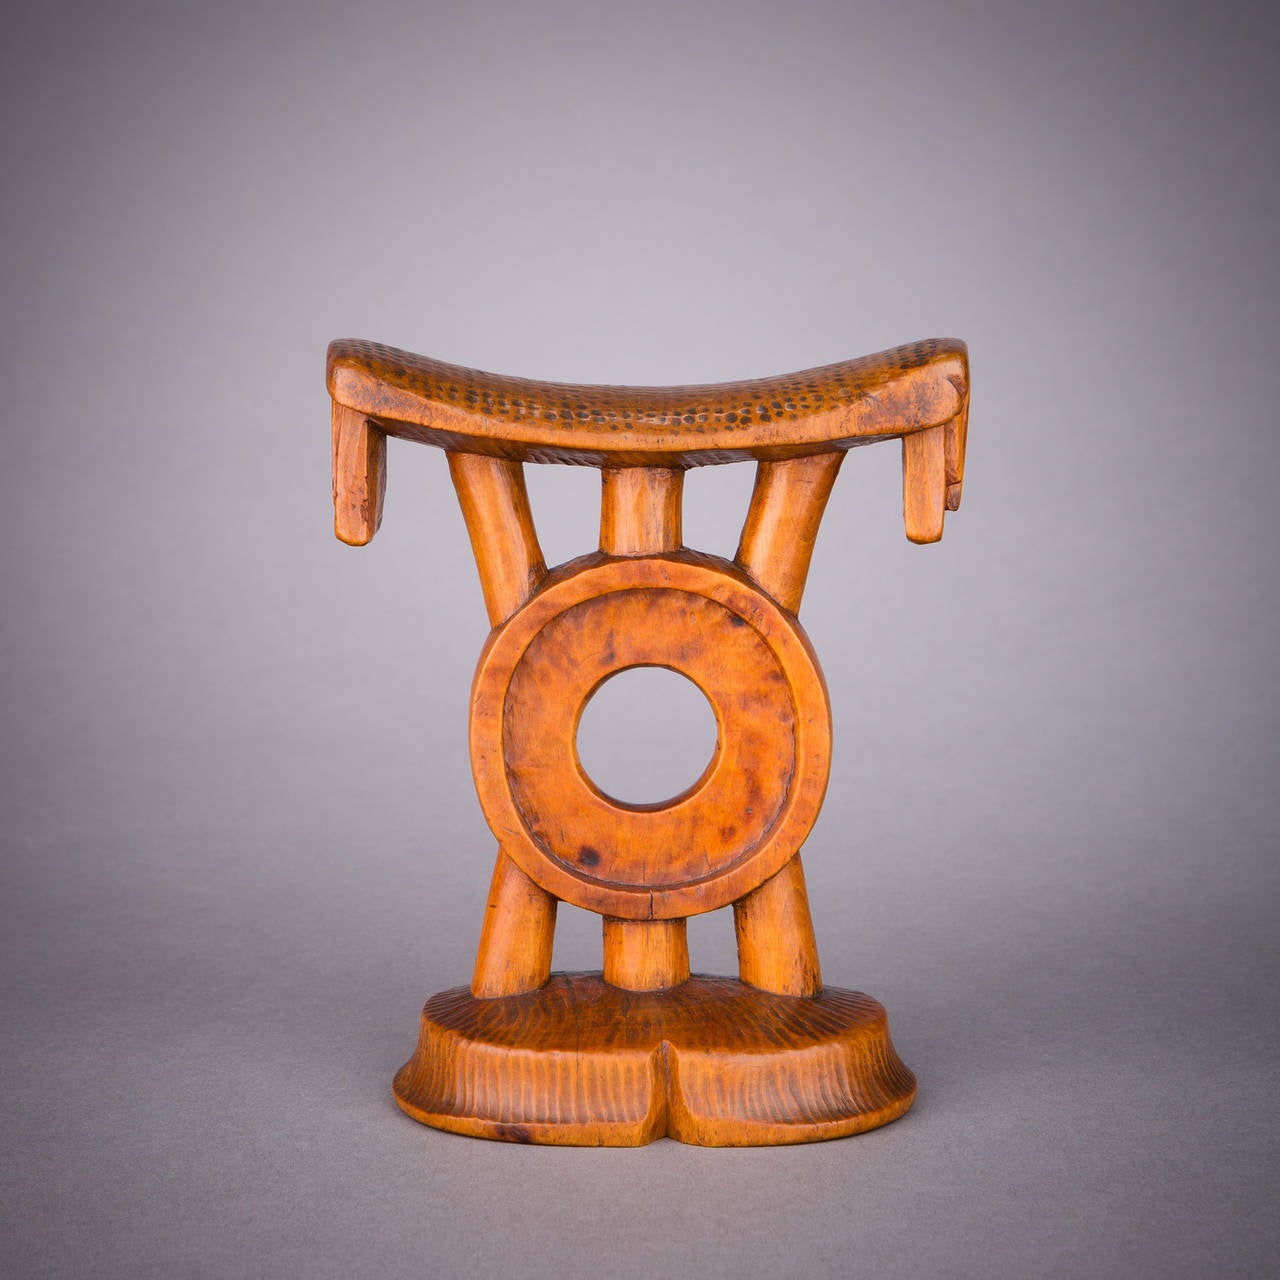 A lovely and compositionally unusual Tsonga headrest with a striking central ring motif. Tsonga carvers were often creative, playful and ingenious in their approach to the architecture of their headrests, a tendency wonderfully illustrated here.